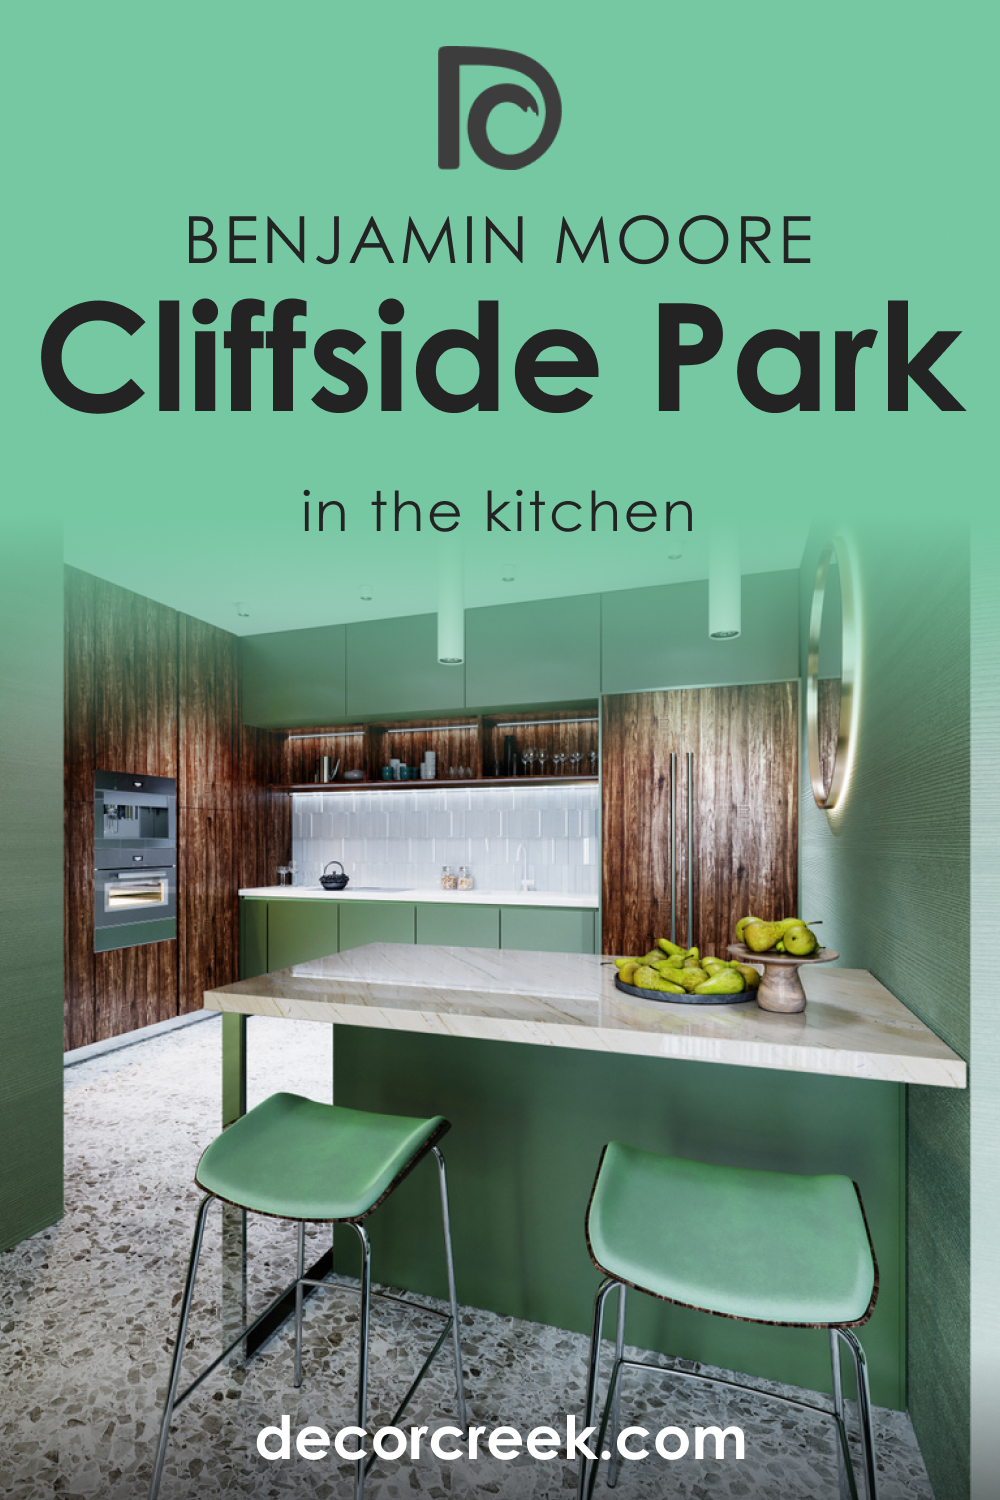 How to Use Cliffside Park 579 in the Kitchen?